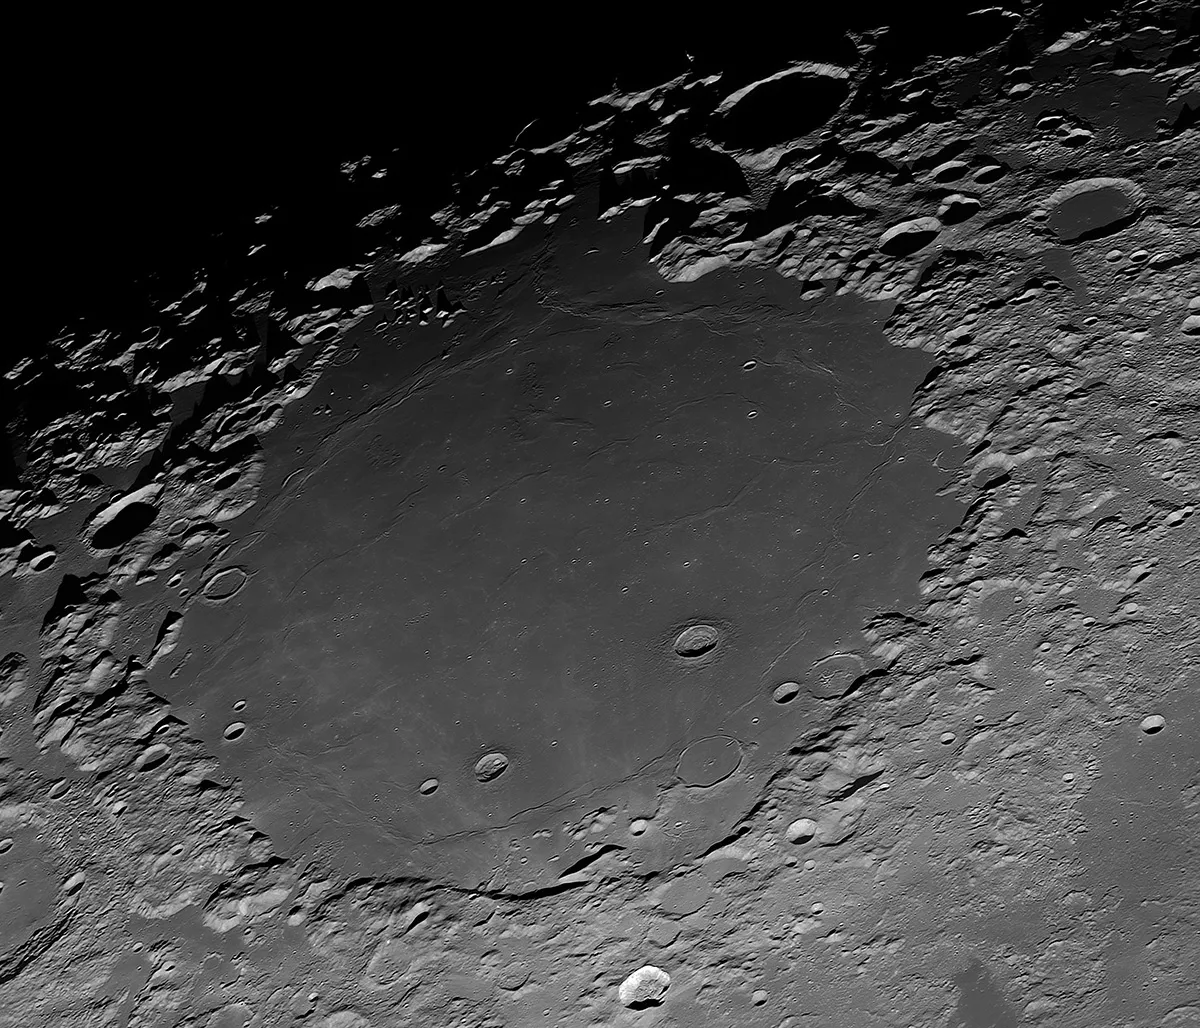 Mare Crisium: From Light to Dark, by Andrea Vanoni, Porto Mantovano, Mantua, Lombardy, Italy. Category: Our Moon Equipment: Newton Ares 405mm F4.5 telescope, Baader R-filter, Sky-Watcher EQ8 mount, ZWO ASI178MM camera, 6000 mm f/20, 1/400 exposure